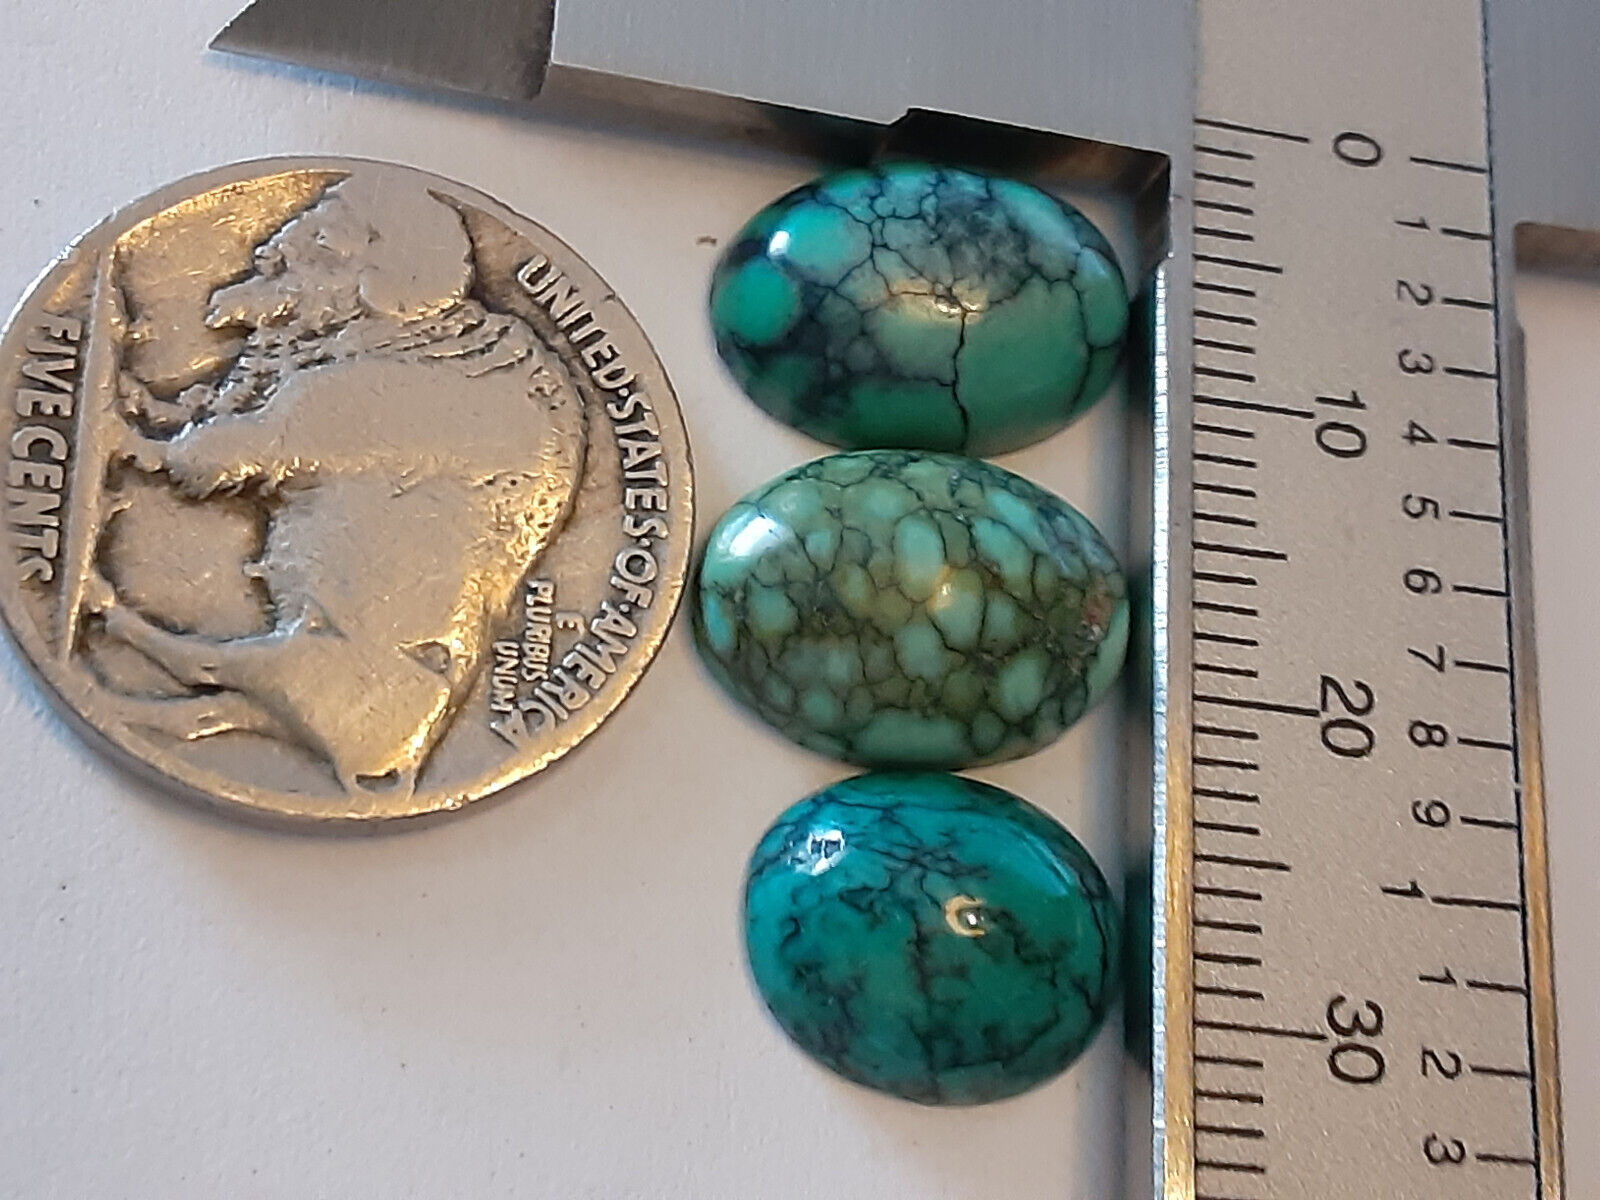  Turquoise 3 Gorgeous Cabochons (2) 10 x 14 mm  (1) 12 x 10 mm BEAUTIFUL